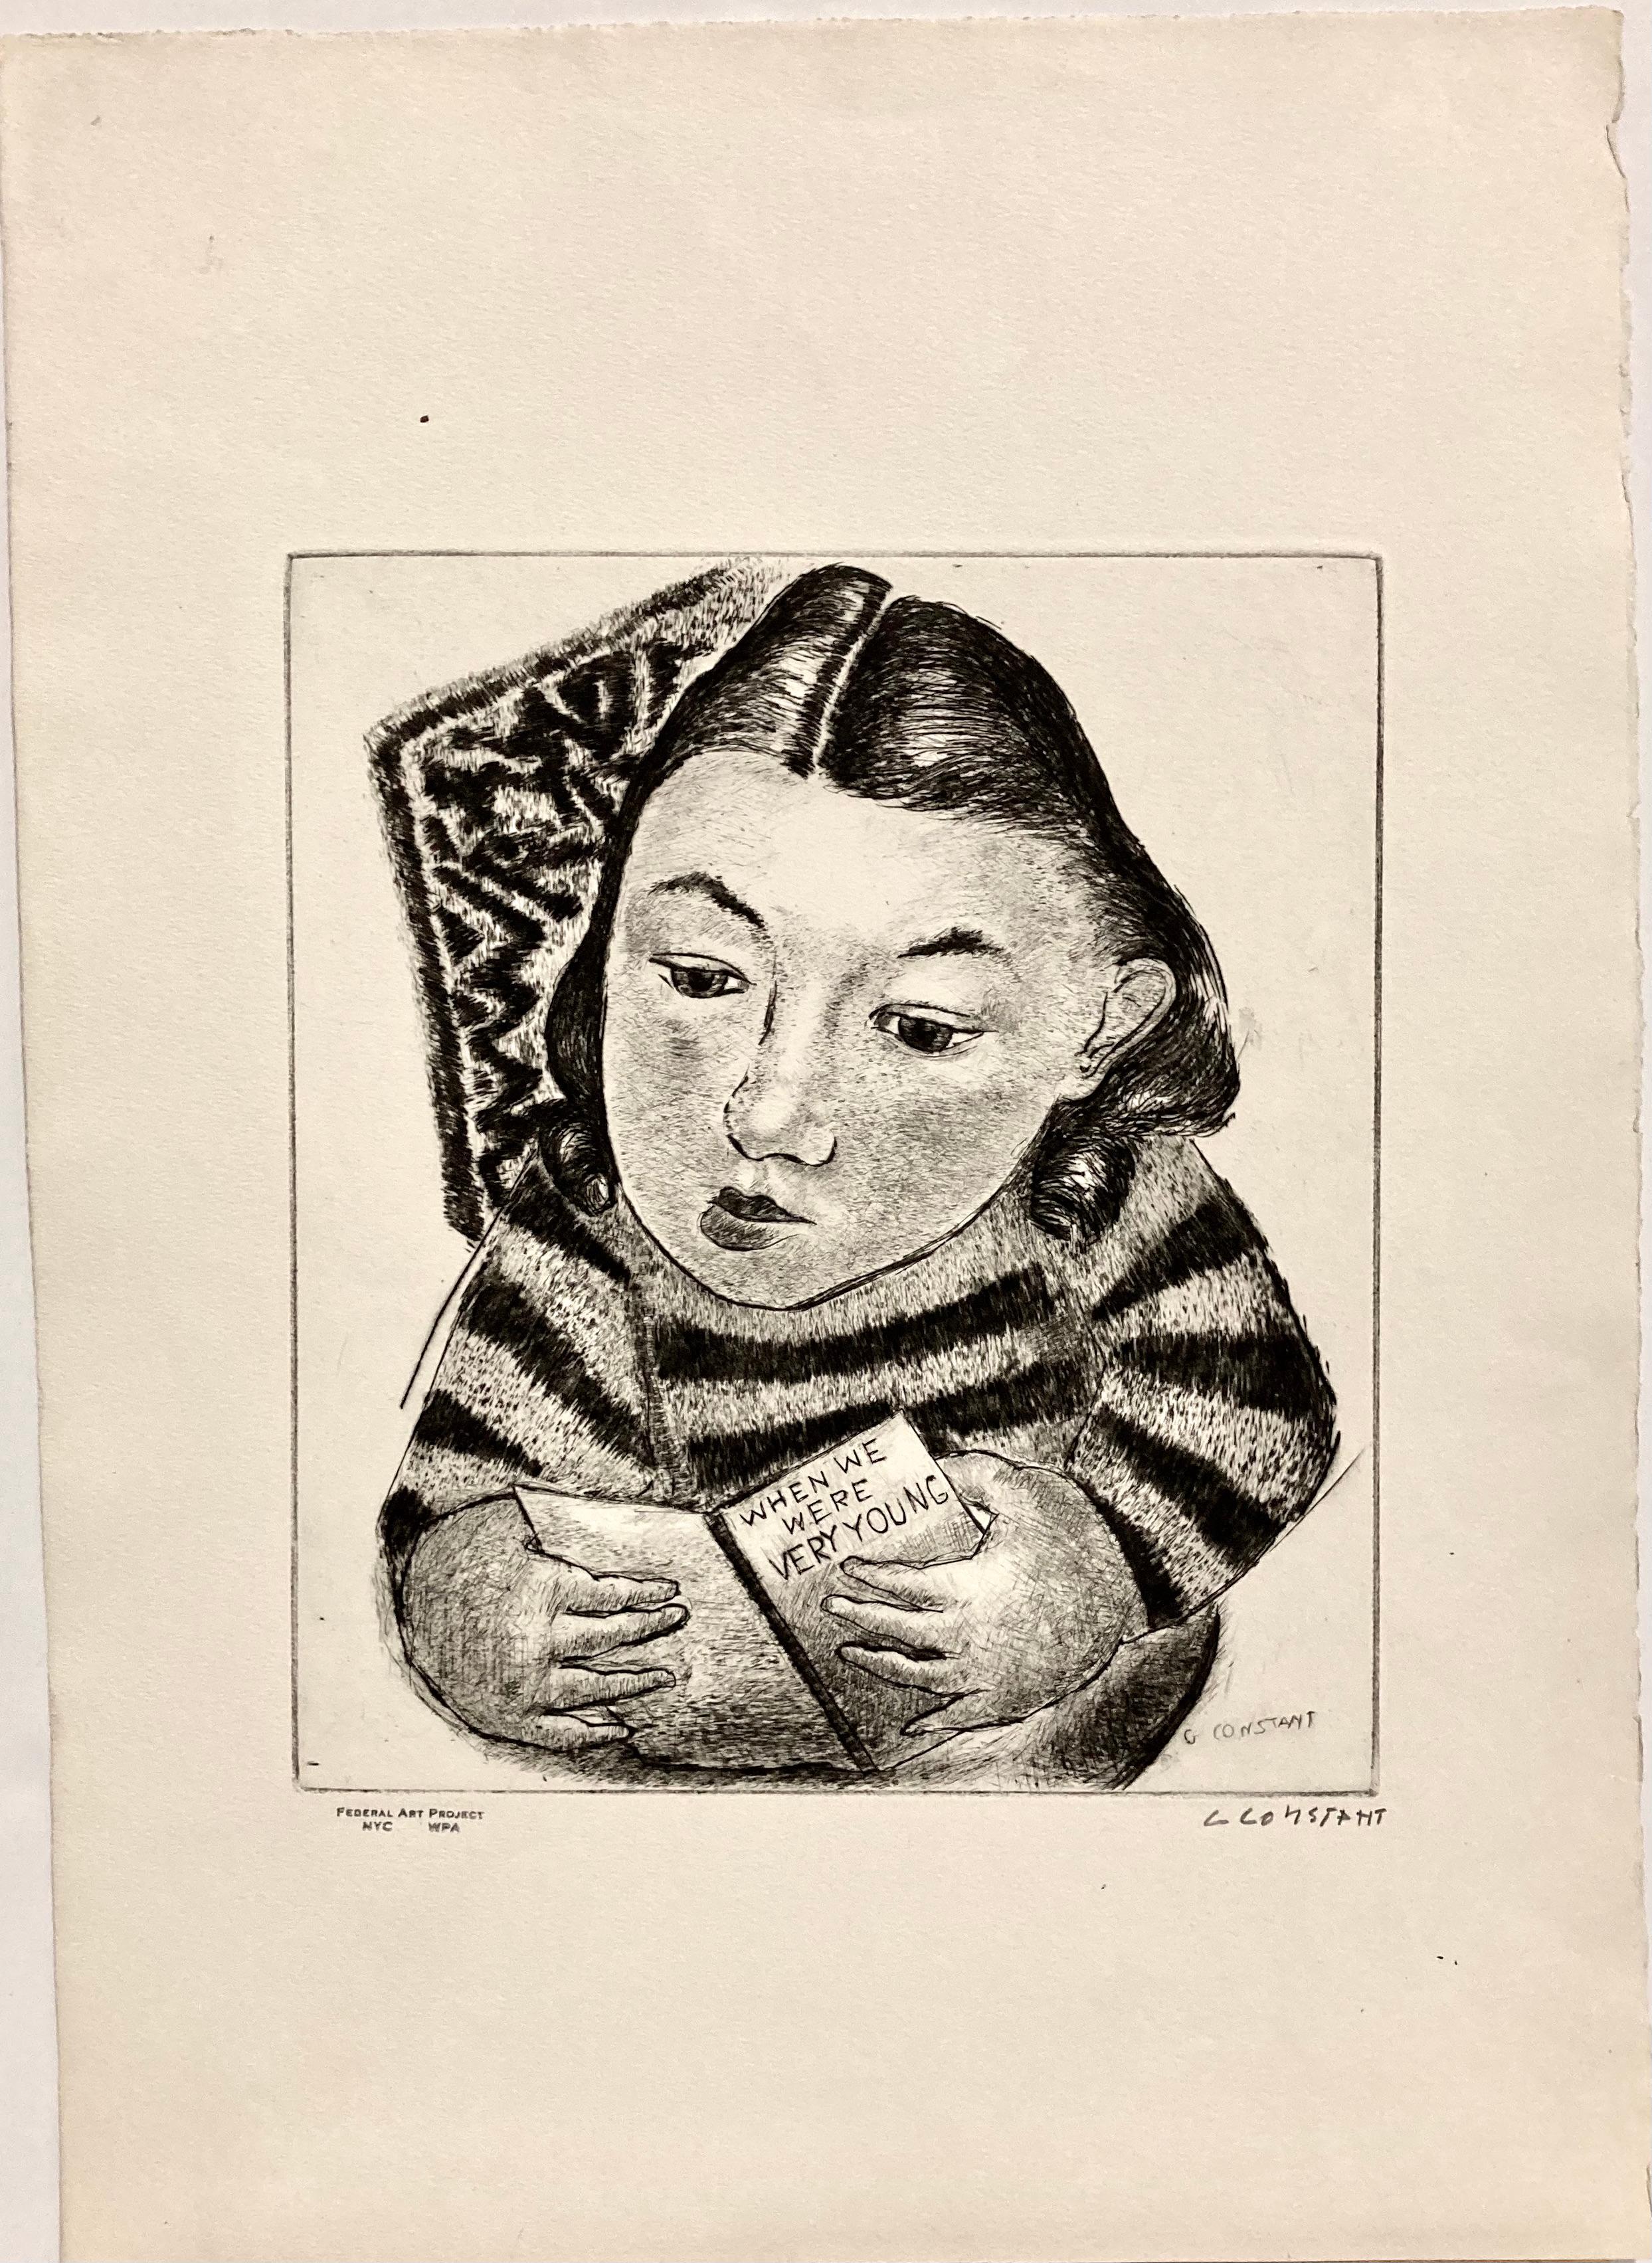 The Greek-American artist George Constant is known for his modernist approach to traditional subject matter. This portrait of a young woman holding a book titled 